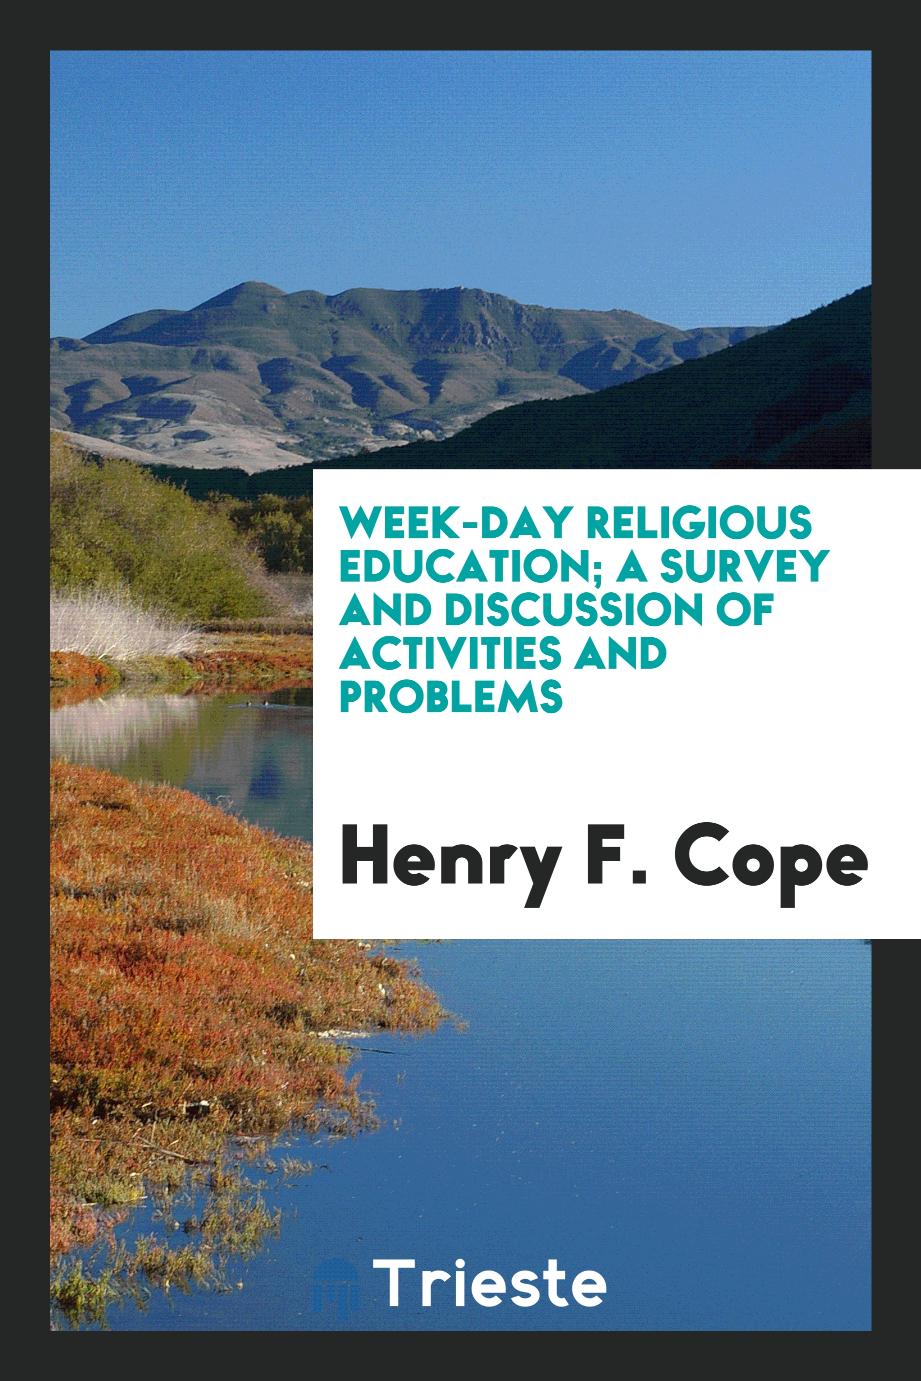 Week-day religious education; a survey and discussion of activities and problems